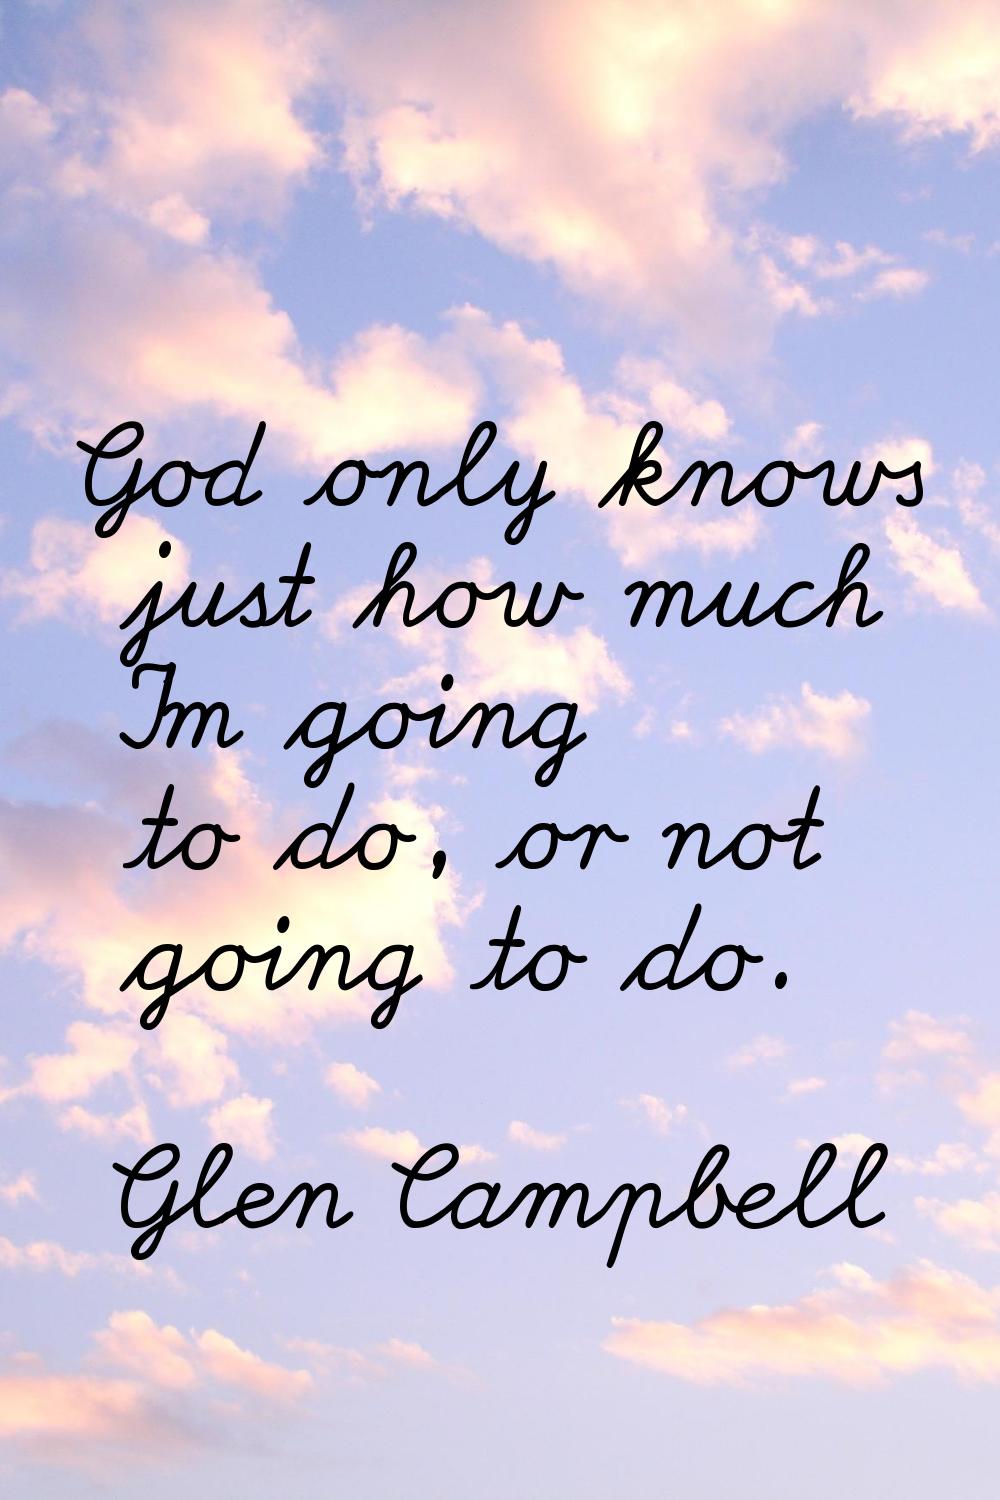 God only knows just how much I'm going to do, or not going to do.